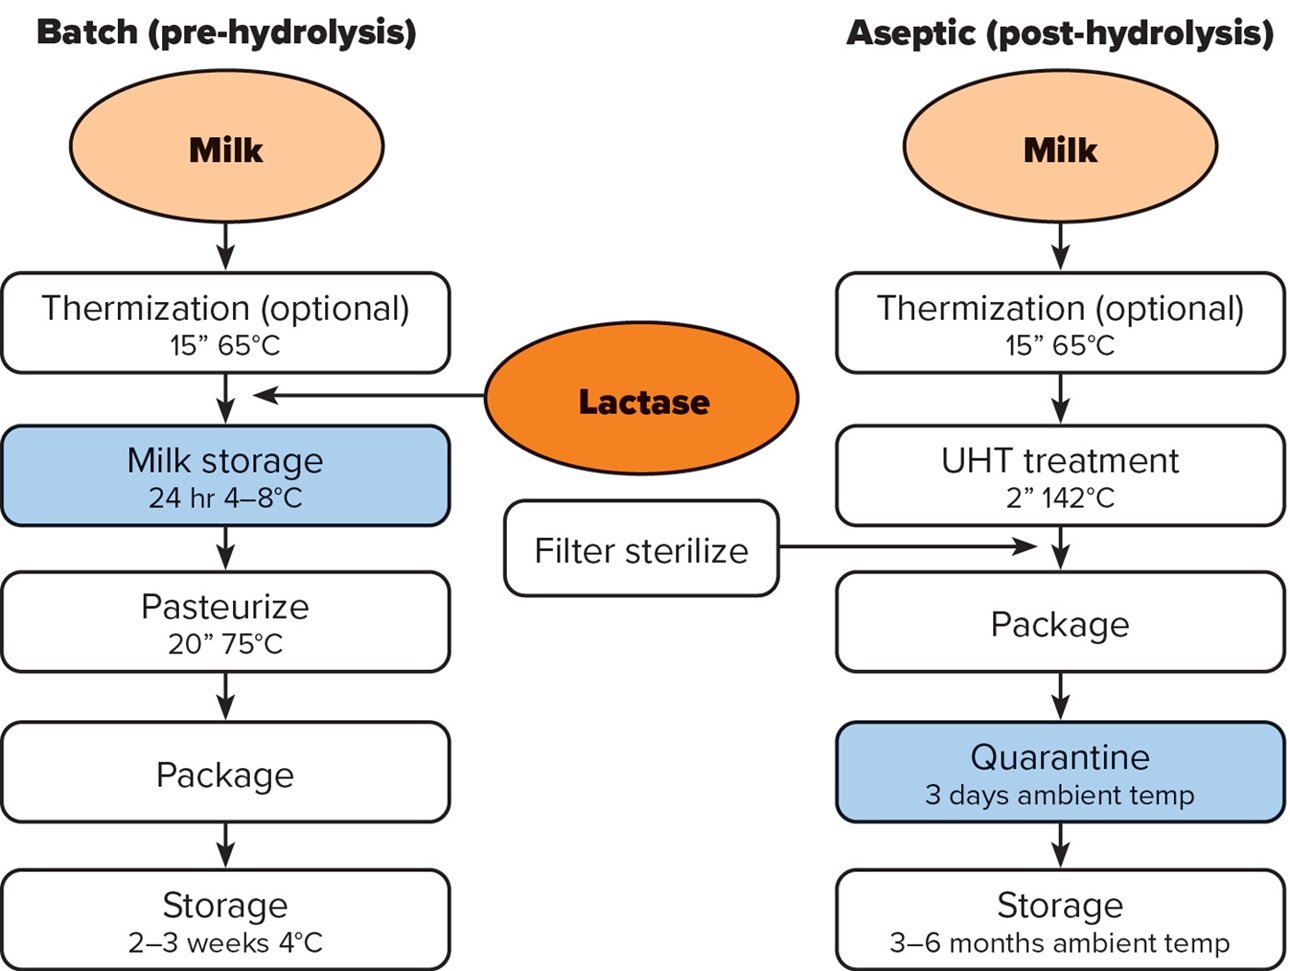 Figure 1. A schematic representation of the batch (left) and aseptic (right) processes that are used to produce lactose-free milk.